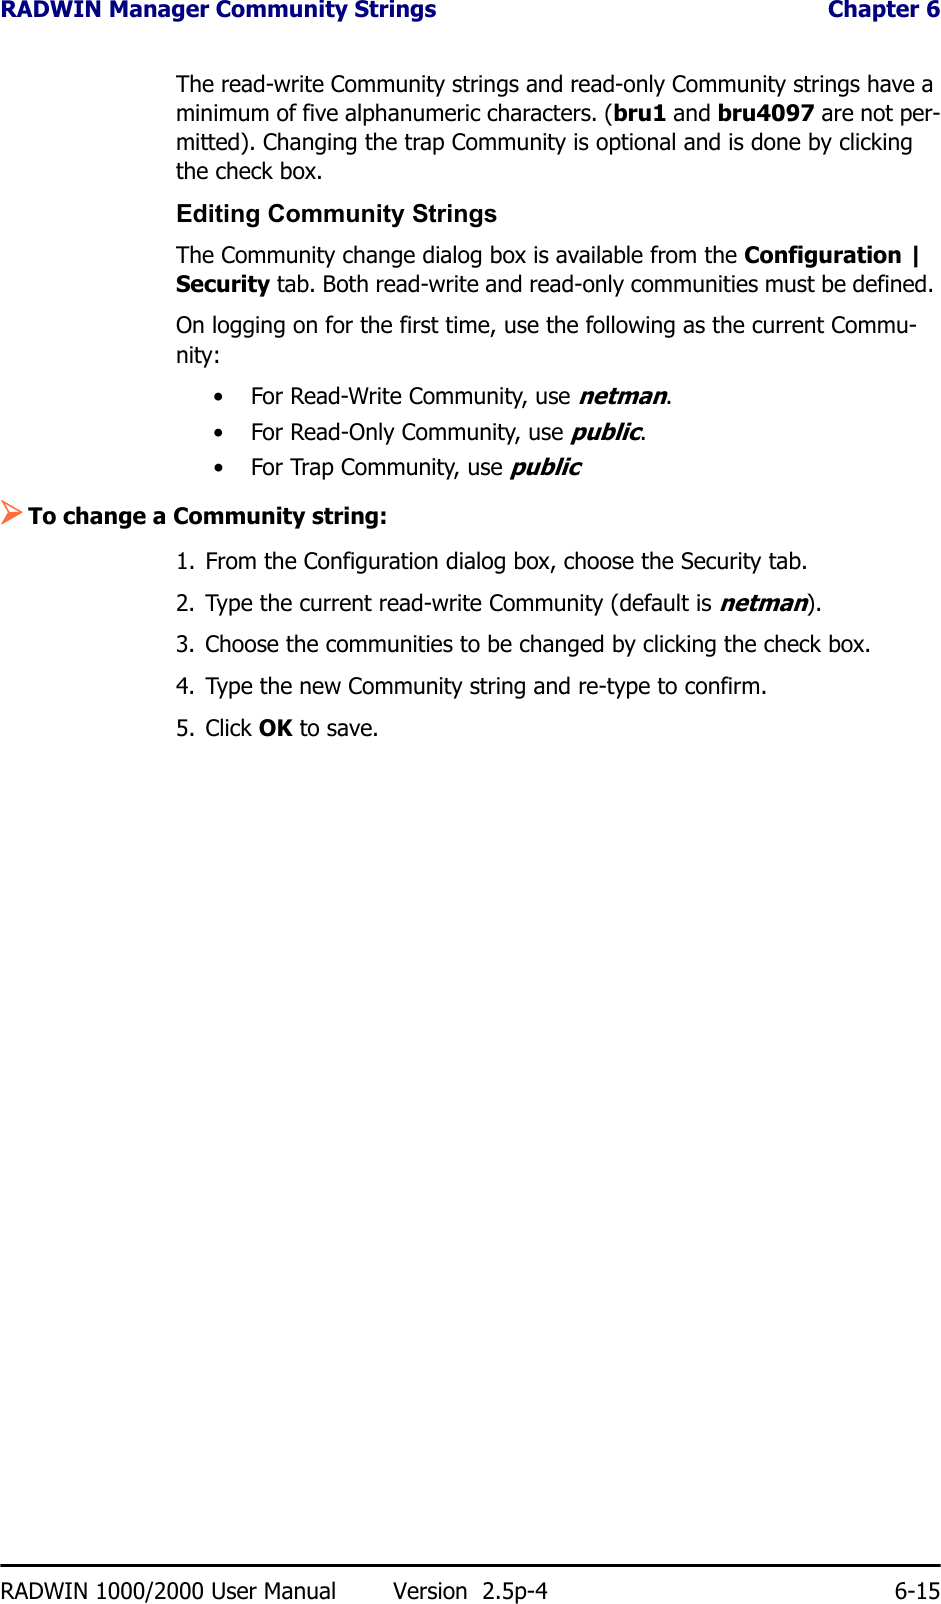 RADWIN Manager Community Strings  Chapter 6RADWIN 1000/2000 User Manual Version  2.5p-4 6-15The read-write Community strings and read-only Community strings have a minimum of five alphanumeric characters. (bru1 and bru4097 are not per-mitted). Changing the trap Community is optional and is done by clicking the check box.Editing Community StringsThe Community change dialog box is available from the Configuration | Security tab. Both read-write and read-only communities must be defined. On logging on for the first time, use the following as the current Commu-nity:• For Read-Write Community, use netman. • For Read-Only Community, use public.• For Trap Community, use public¾To change a Community string:1. From the Configuration dialog box, choose the Security tab.2. Type the current read-write Community (default is netman).3. Choose the communities to be changed by clicking the check box.4. Type the new Community string and re-type to confirm.5. Click OK to save.